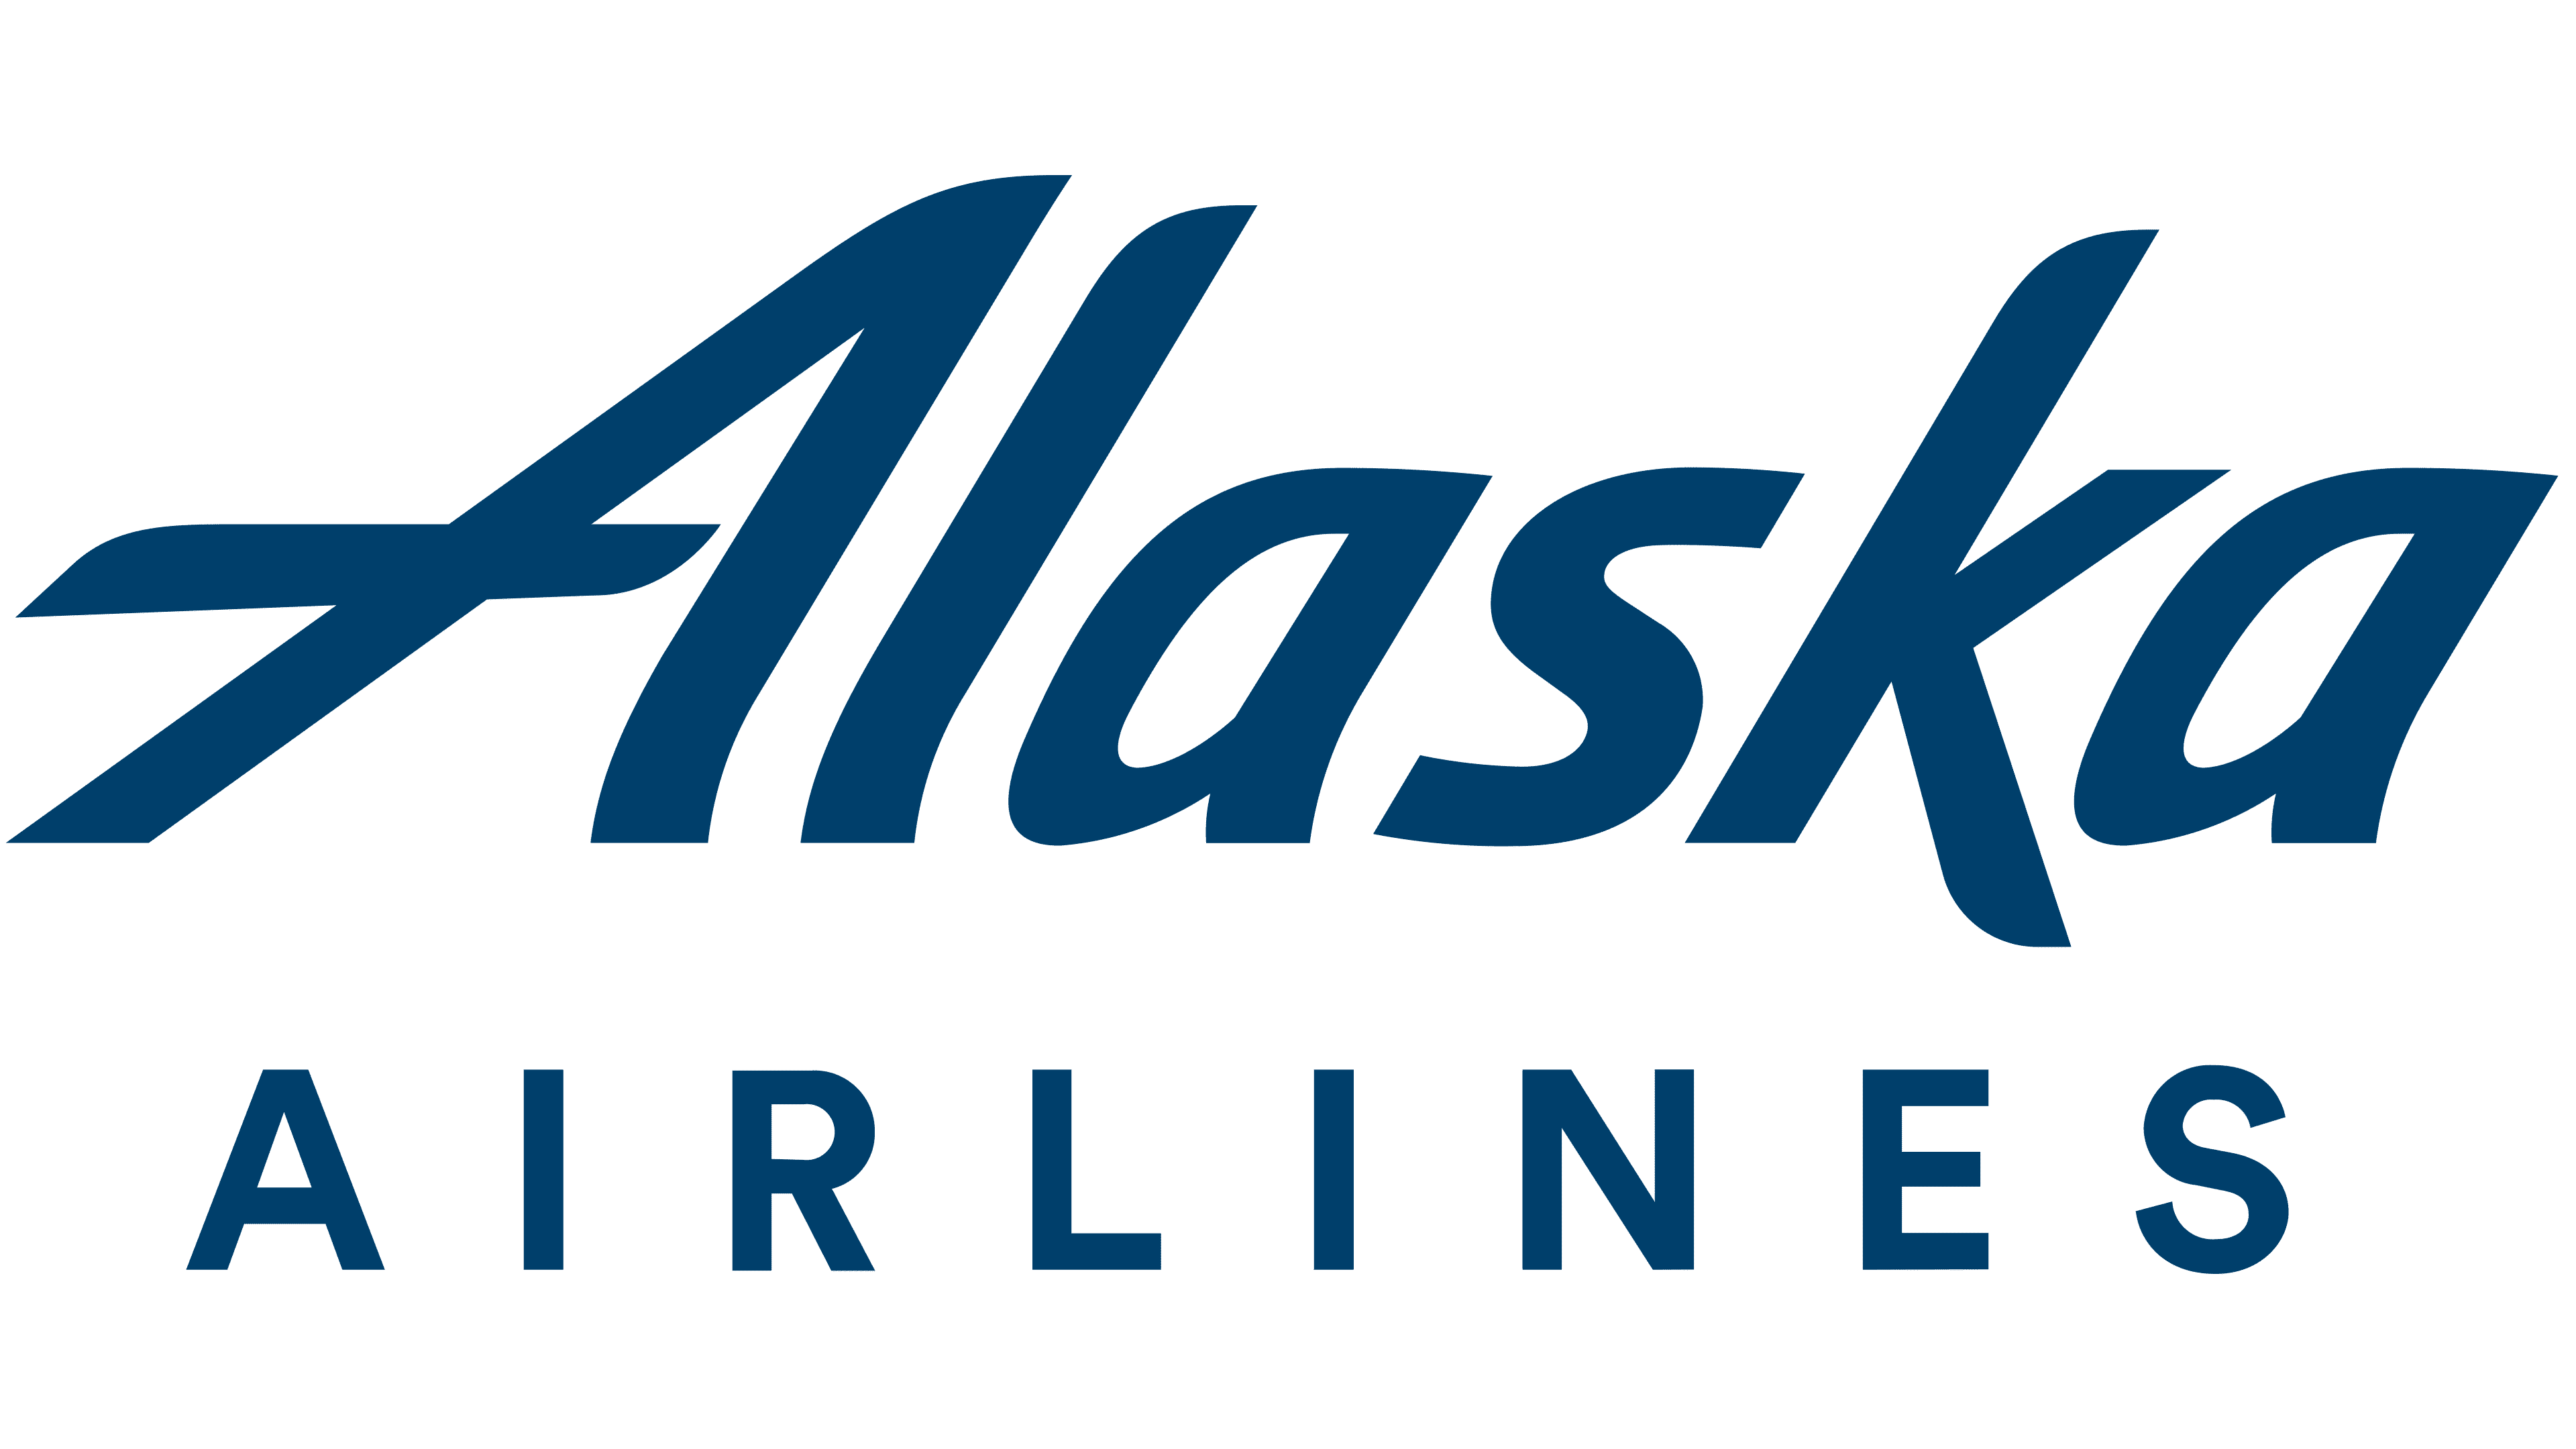 Alaska Airlines Logo, symbol, meaning, history, PNG, brand